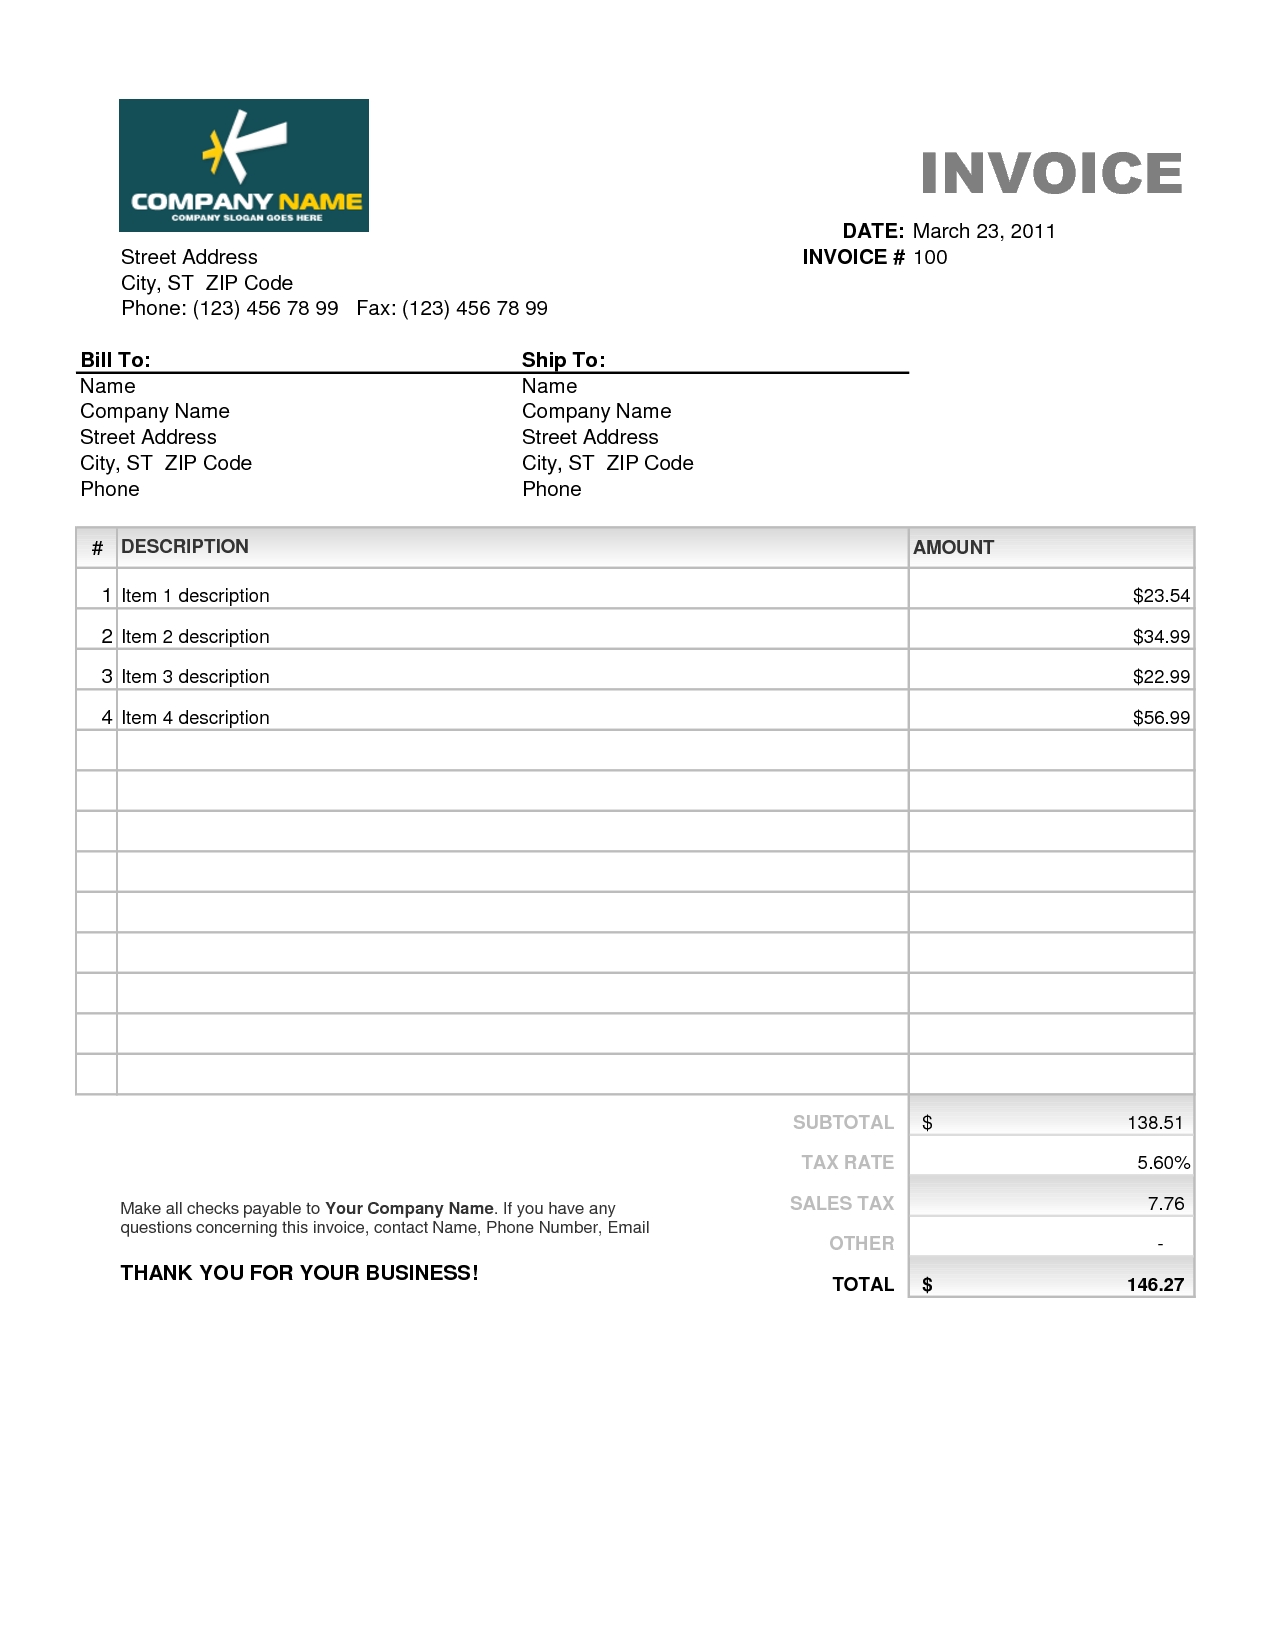 basic invoice template free download